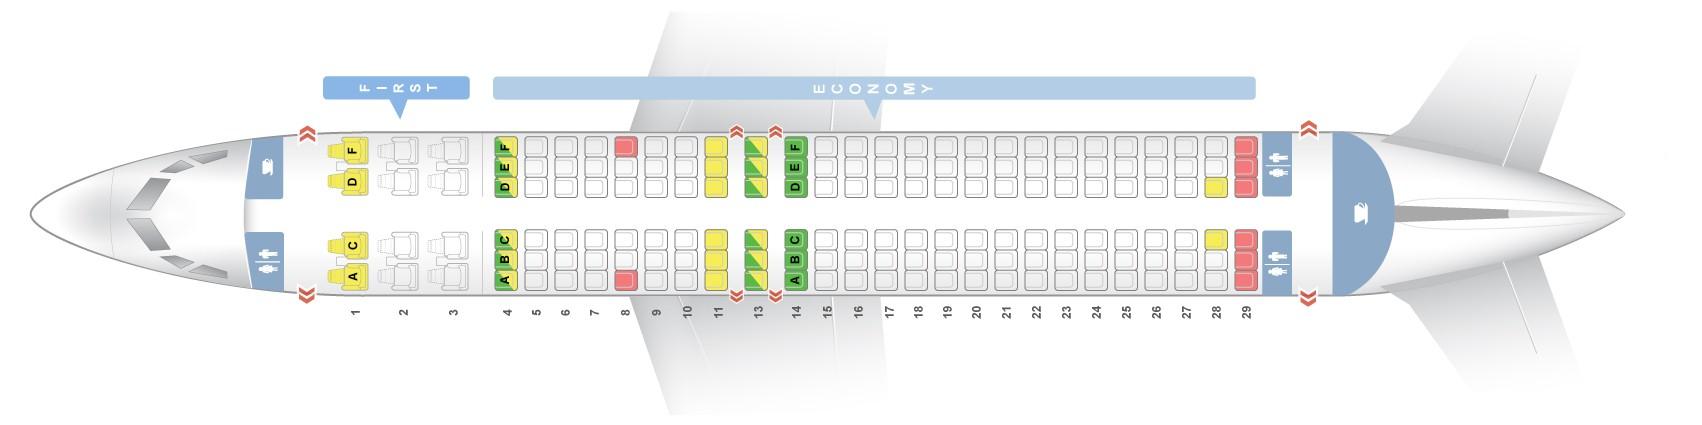 sun country air seat assignments